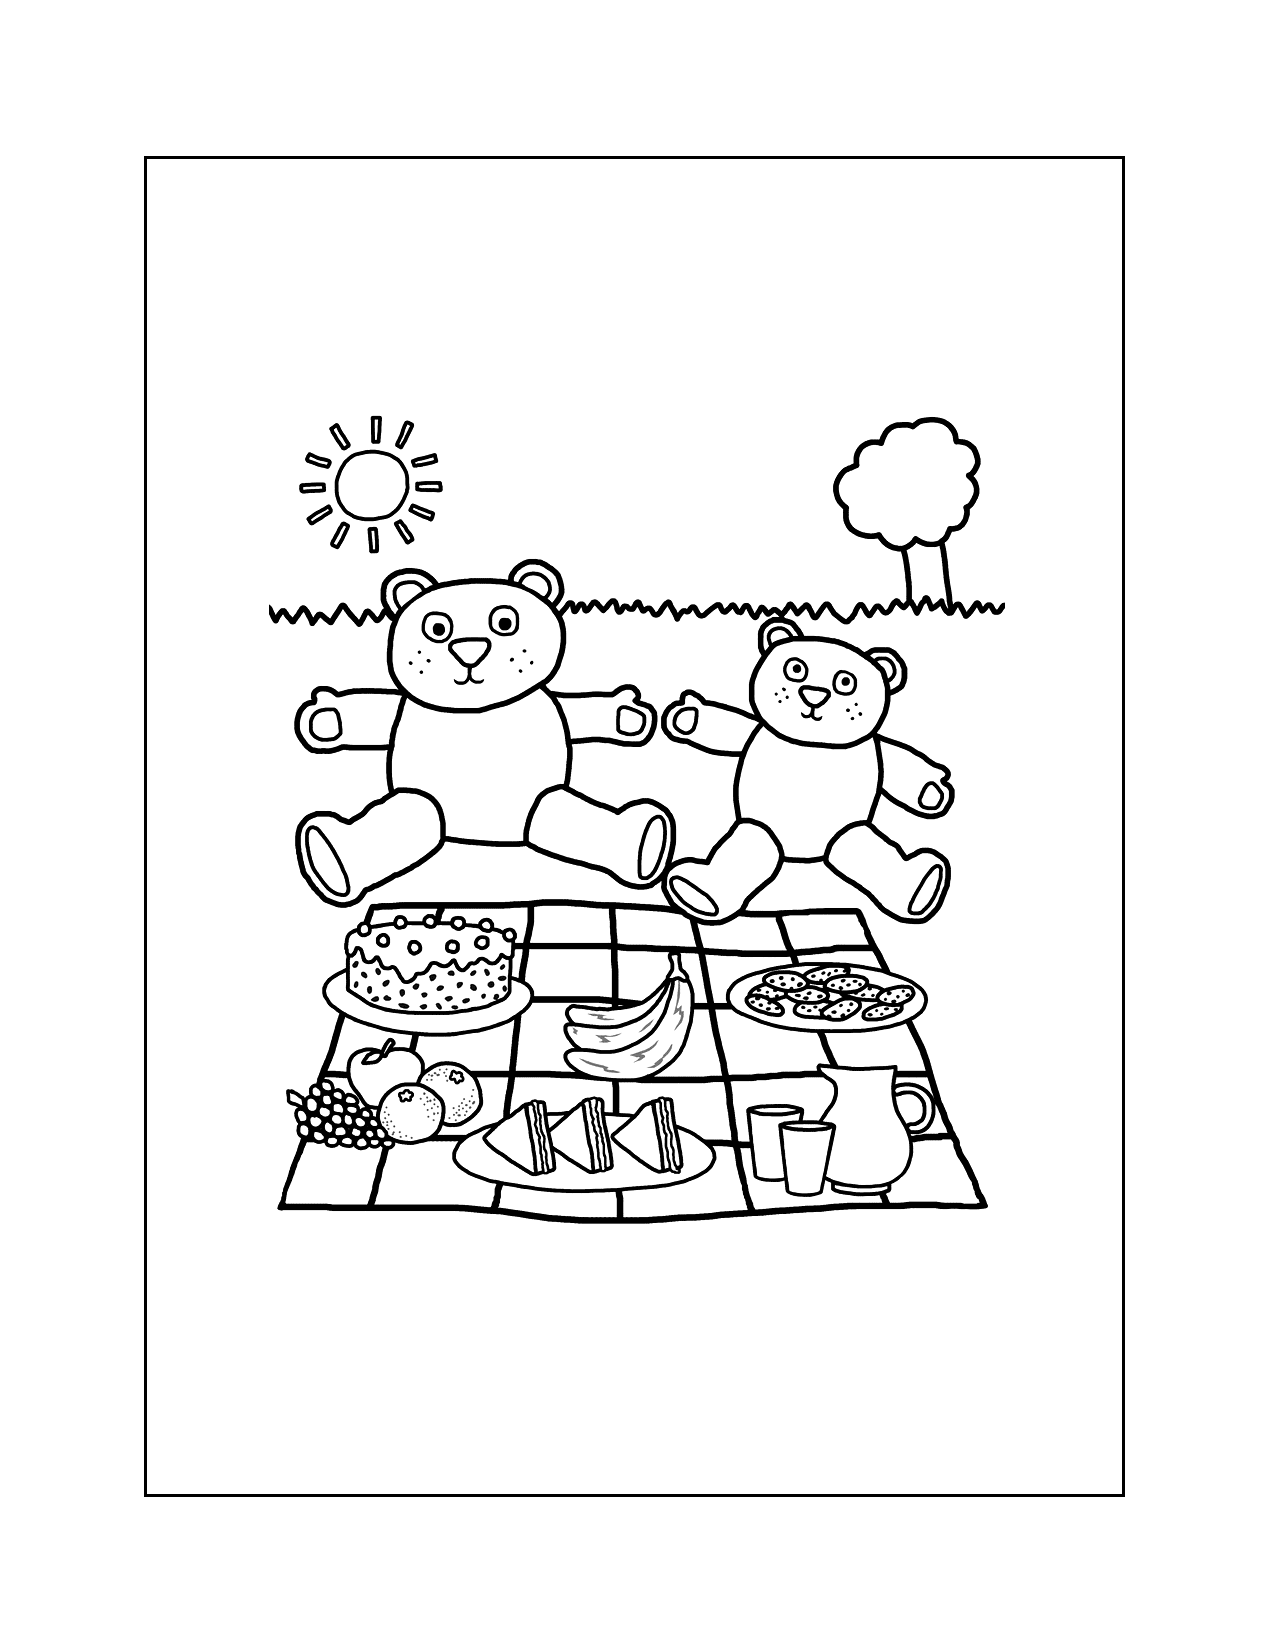 Picnic With Teddy Bears Coloring Page